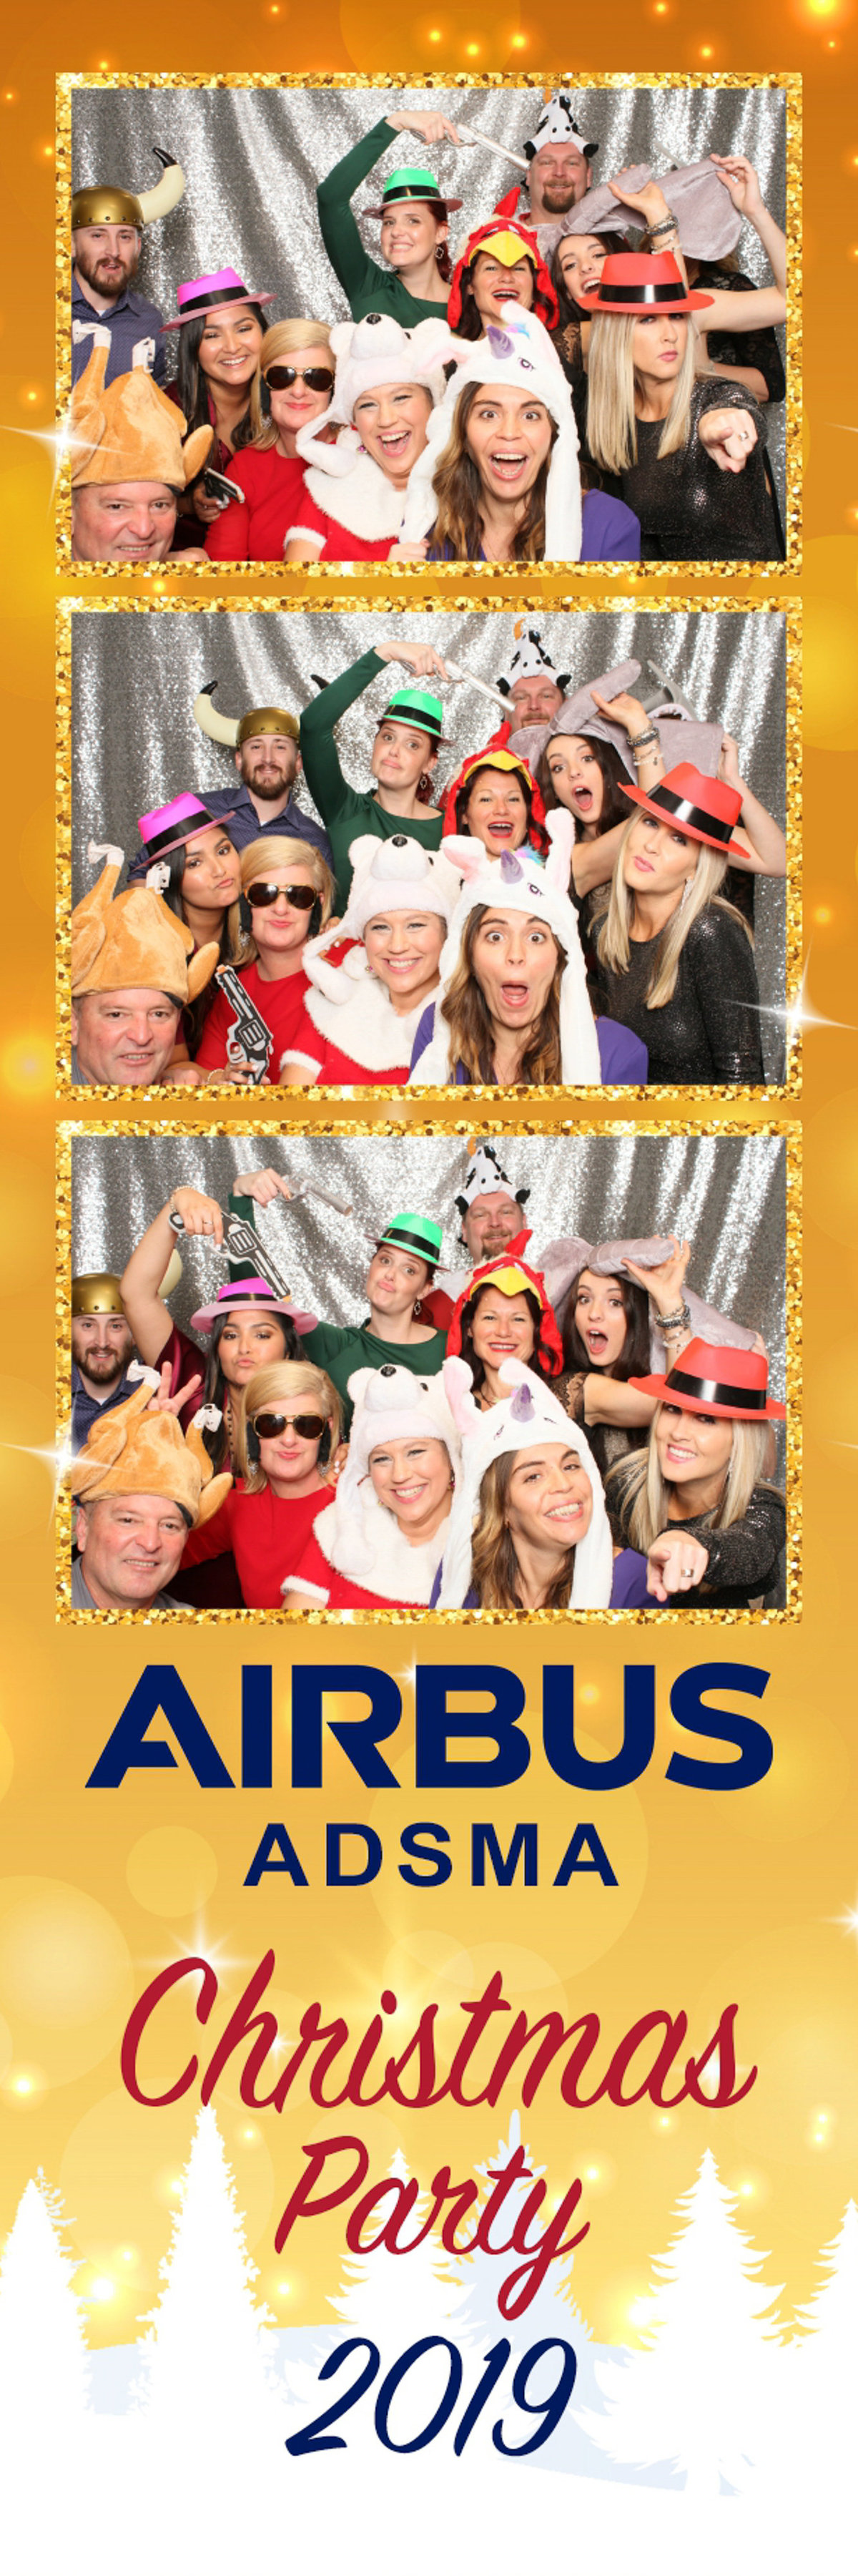 Photo Booth rental for the Airbus ADSMA groups Christmas Party at the Gulfquest Museum in Mobile, Alabama.